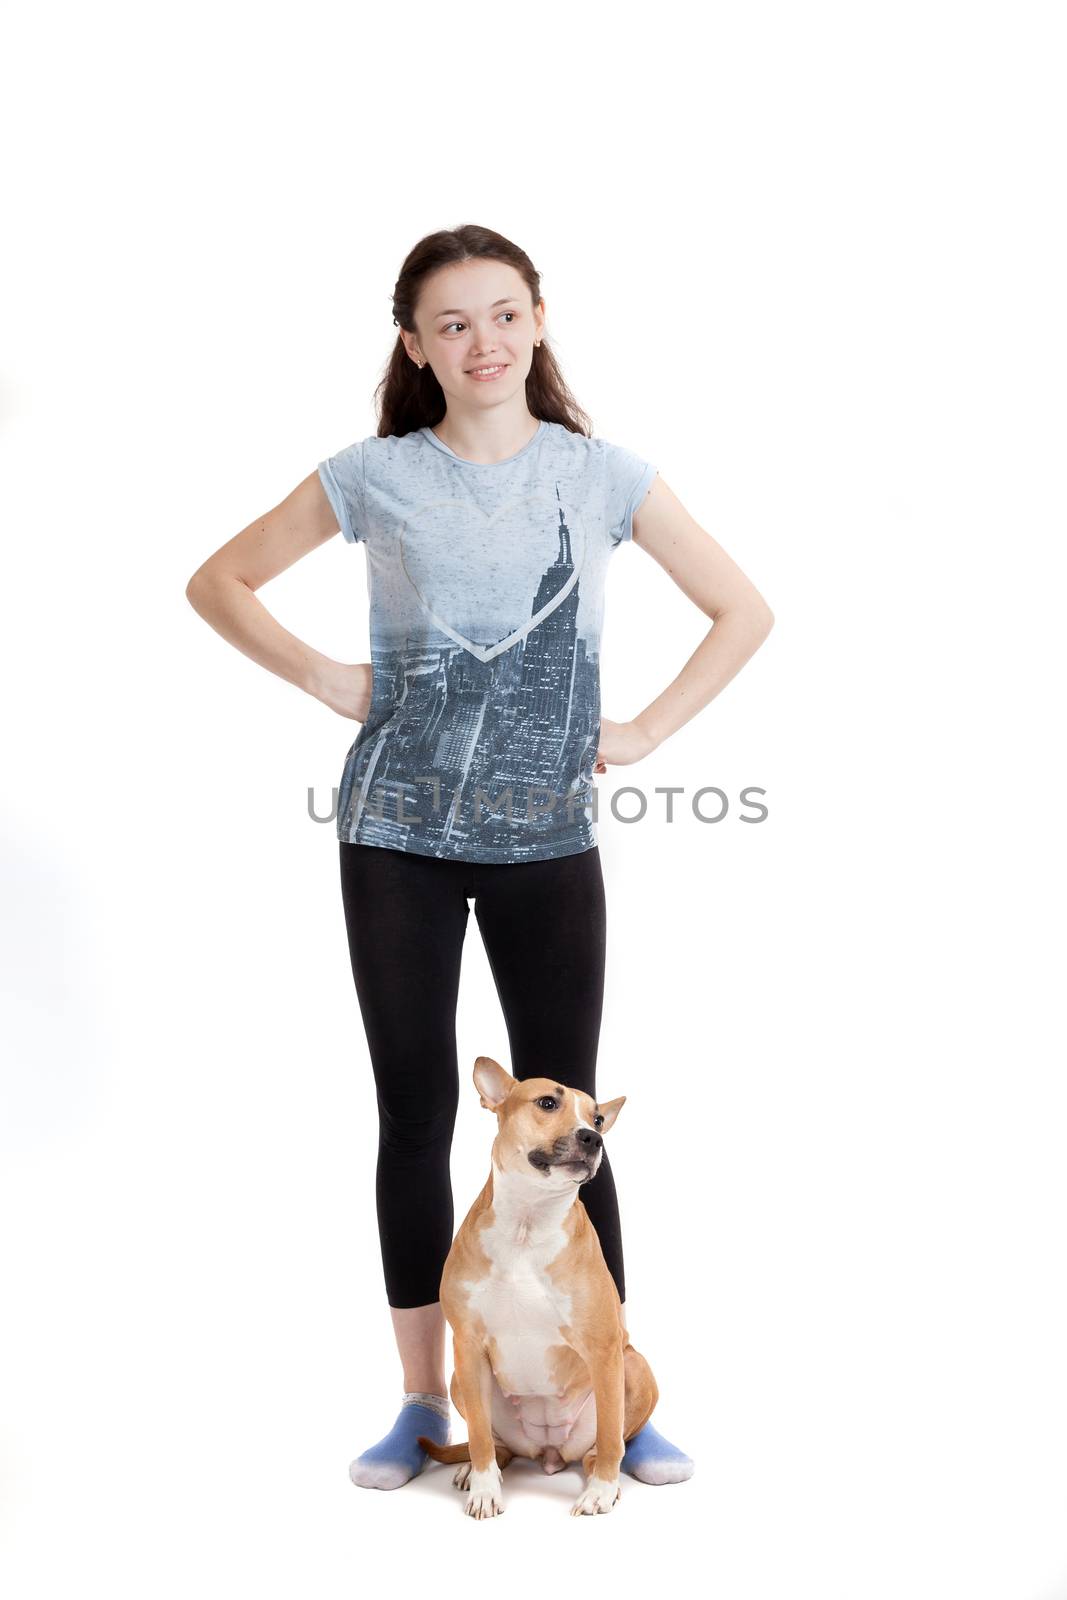 the young beautiful girl and her dog on a white background